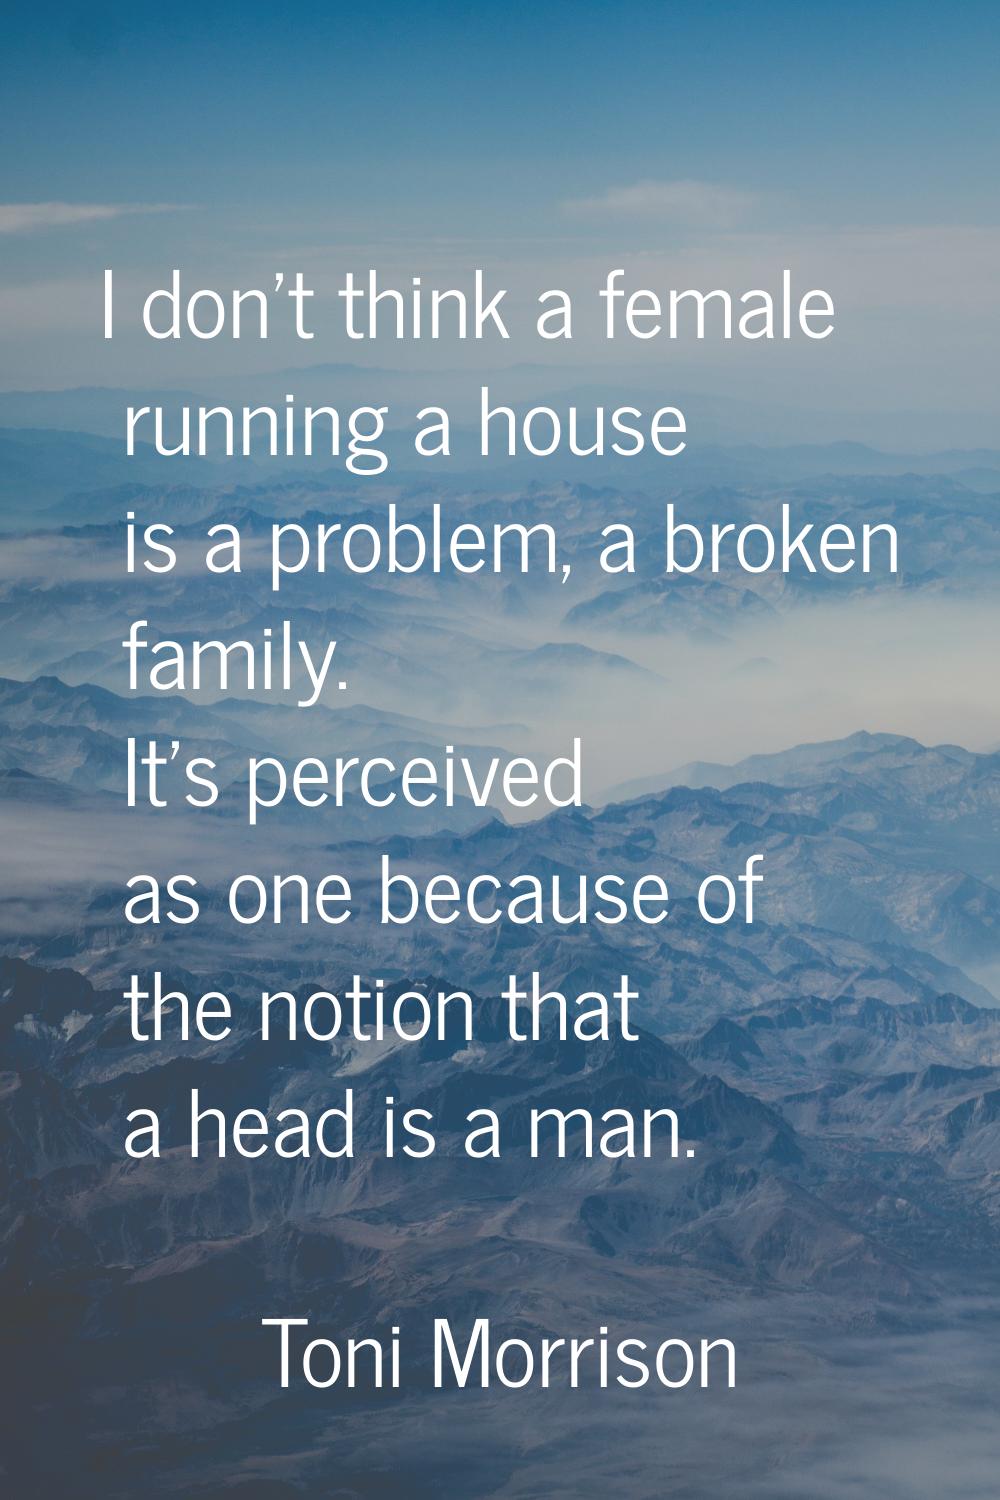 I don't think a female running a house is a problem, a broken family. It's perceived as one because